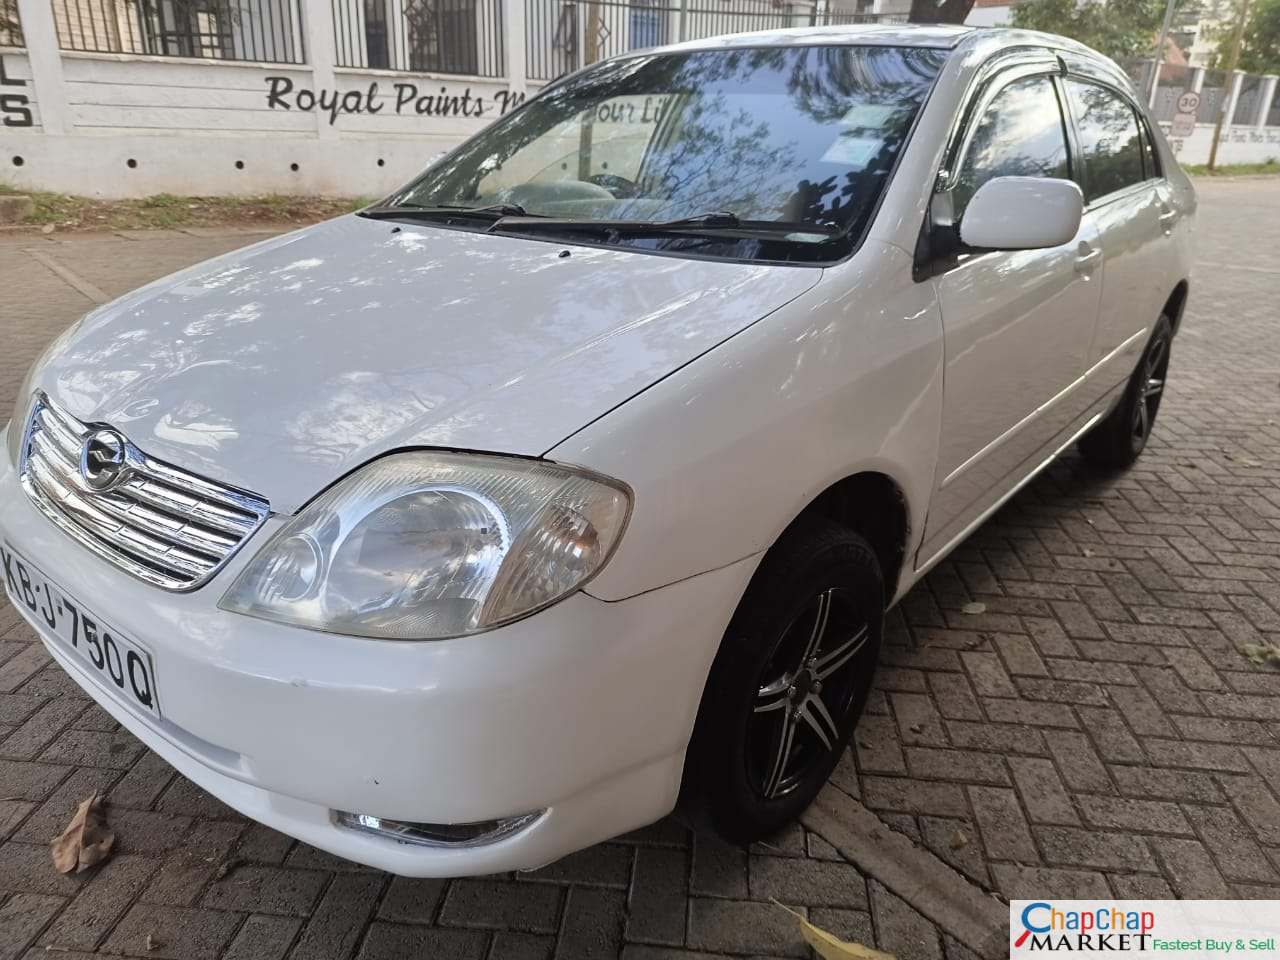 Toyota Corolla NZE QUICK SALE You Pay 35% Deposit Trade in OK Wow